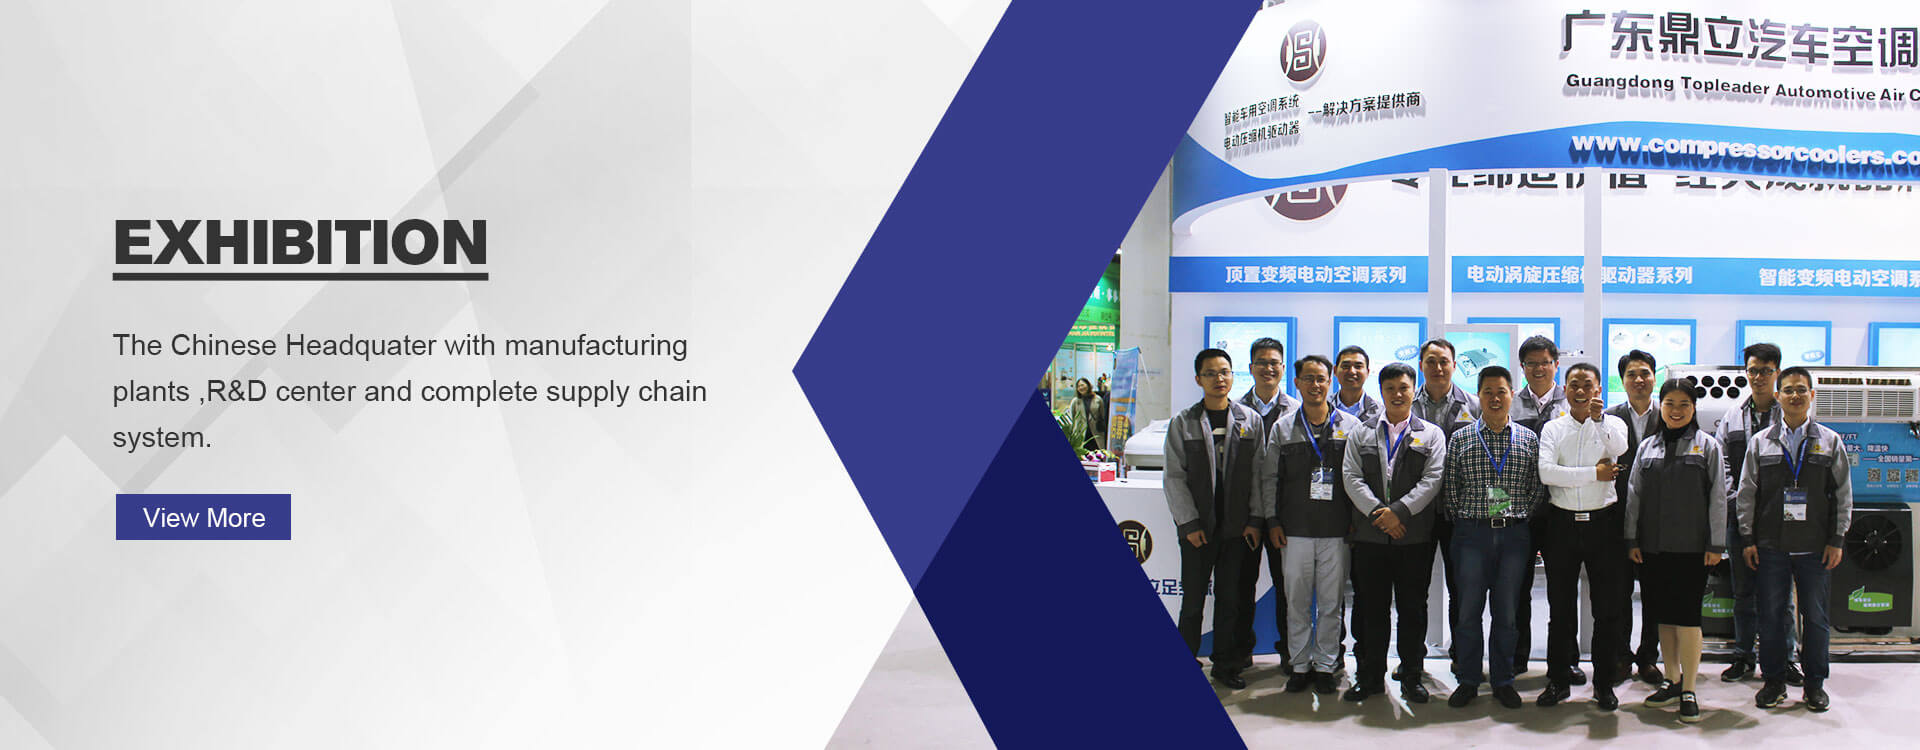 Guangdong Topleader Automotive Air Conditioning Co., Ltd.